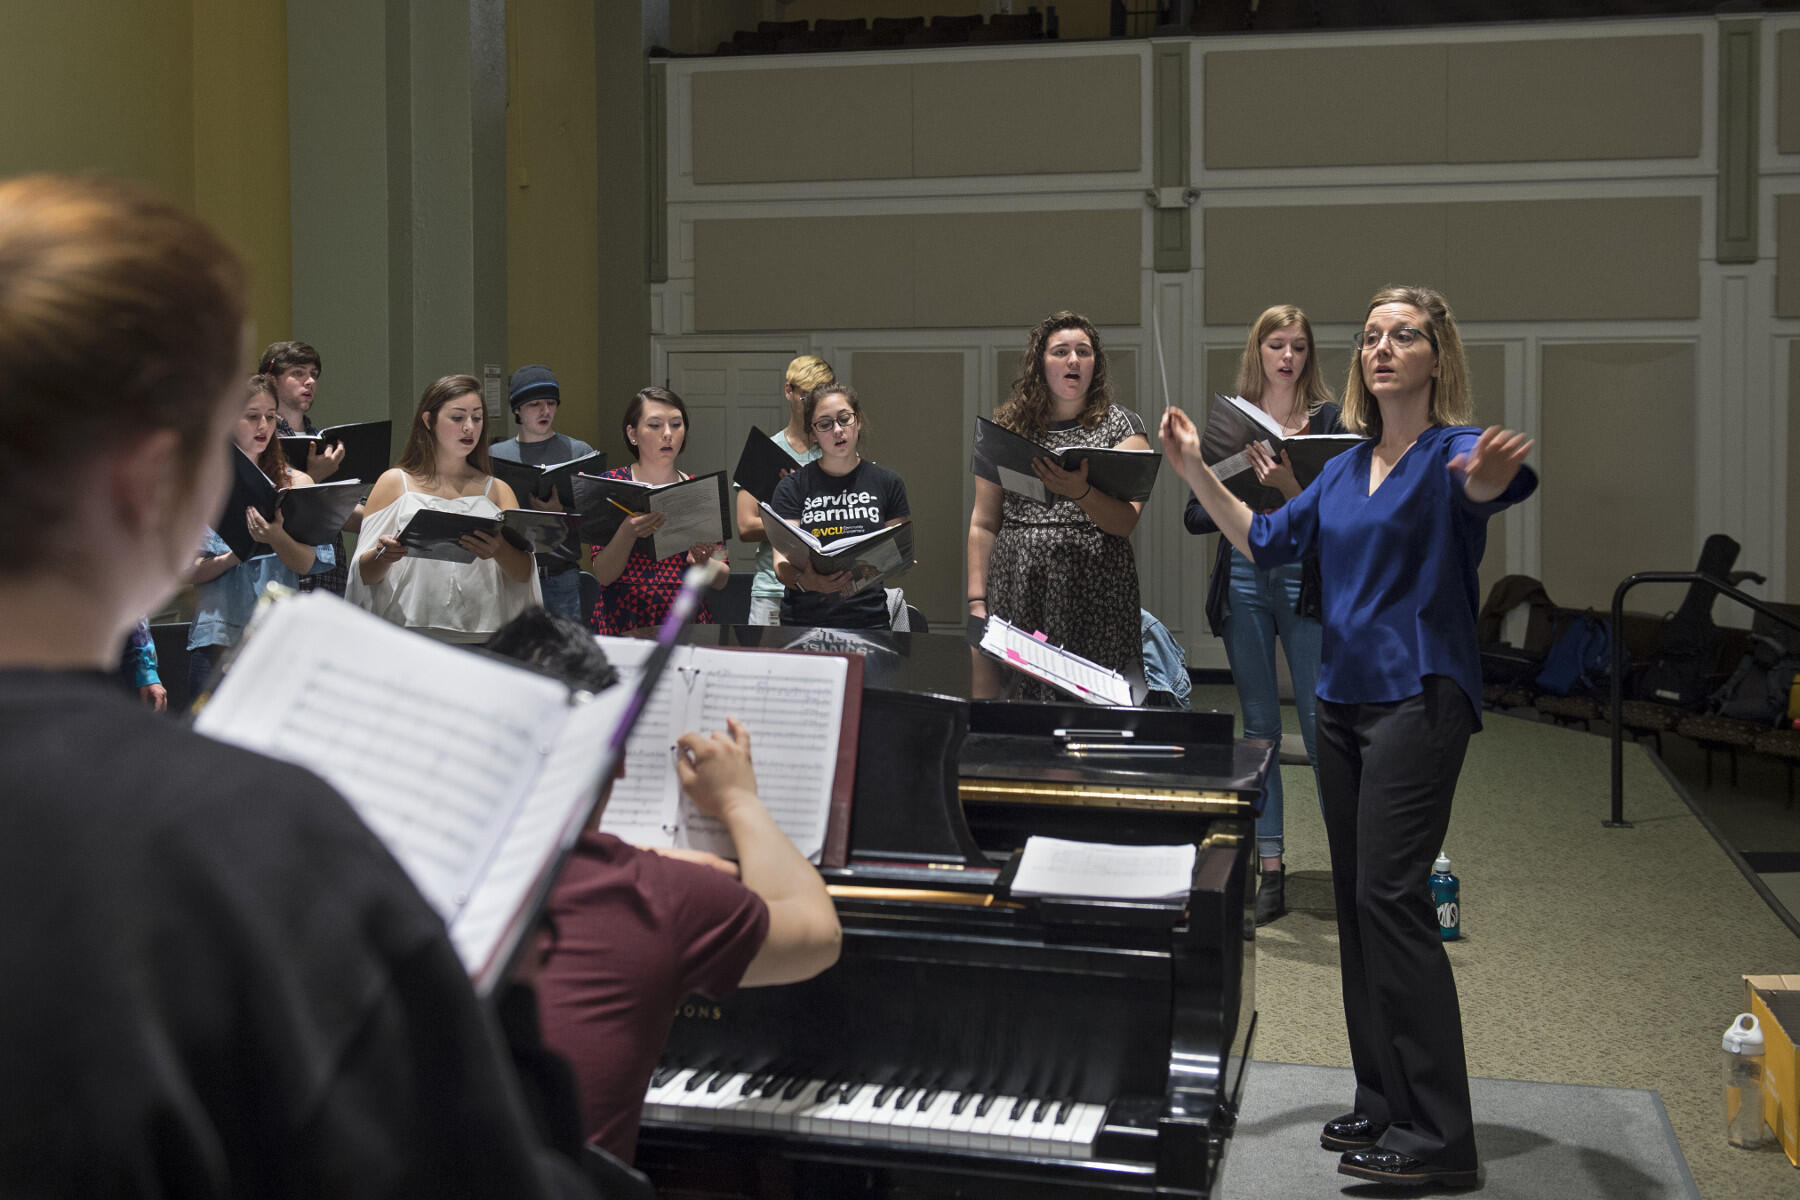 Erin Freeman, who holds a joint position as director of the Richmond Symphony Chorus and Director of Choral Activities at VCU, leads the VCU Commonwealth Singers during a rehearsal of “Open Minds, Closer Thoughts."